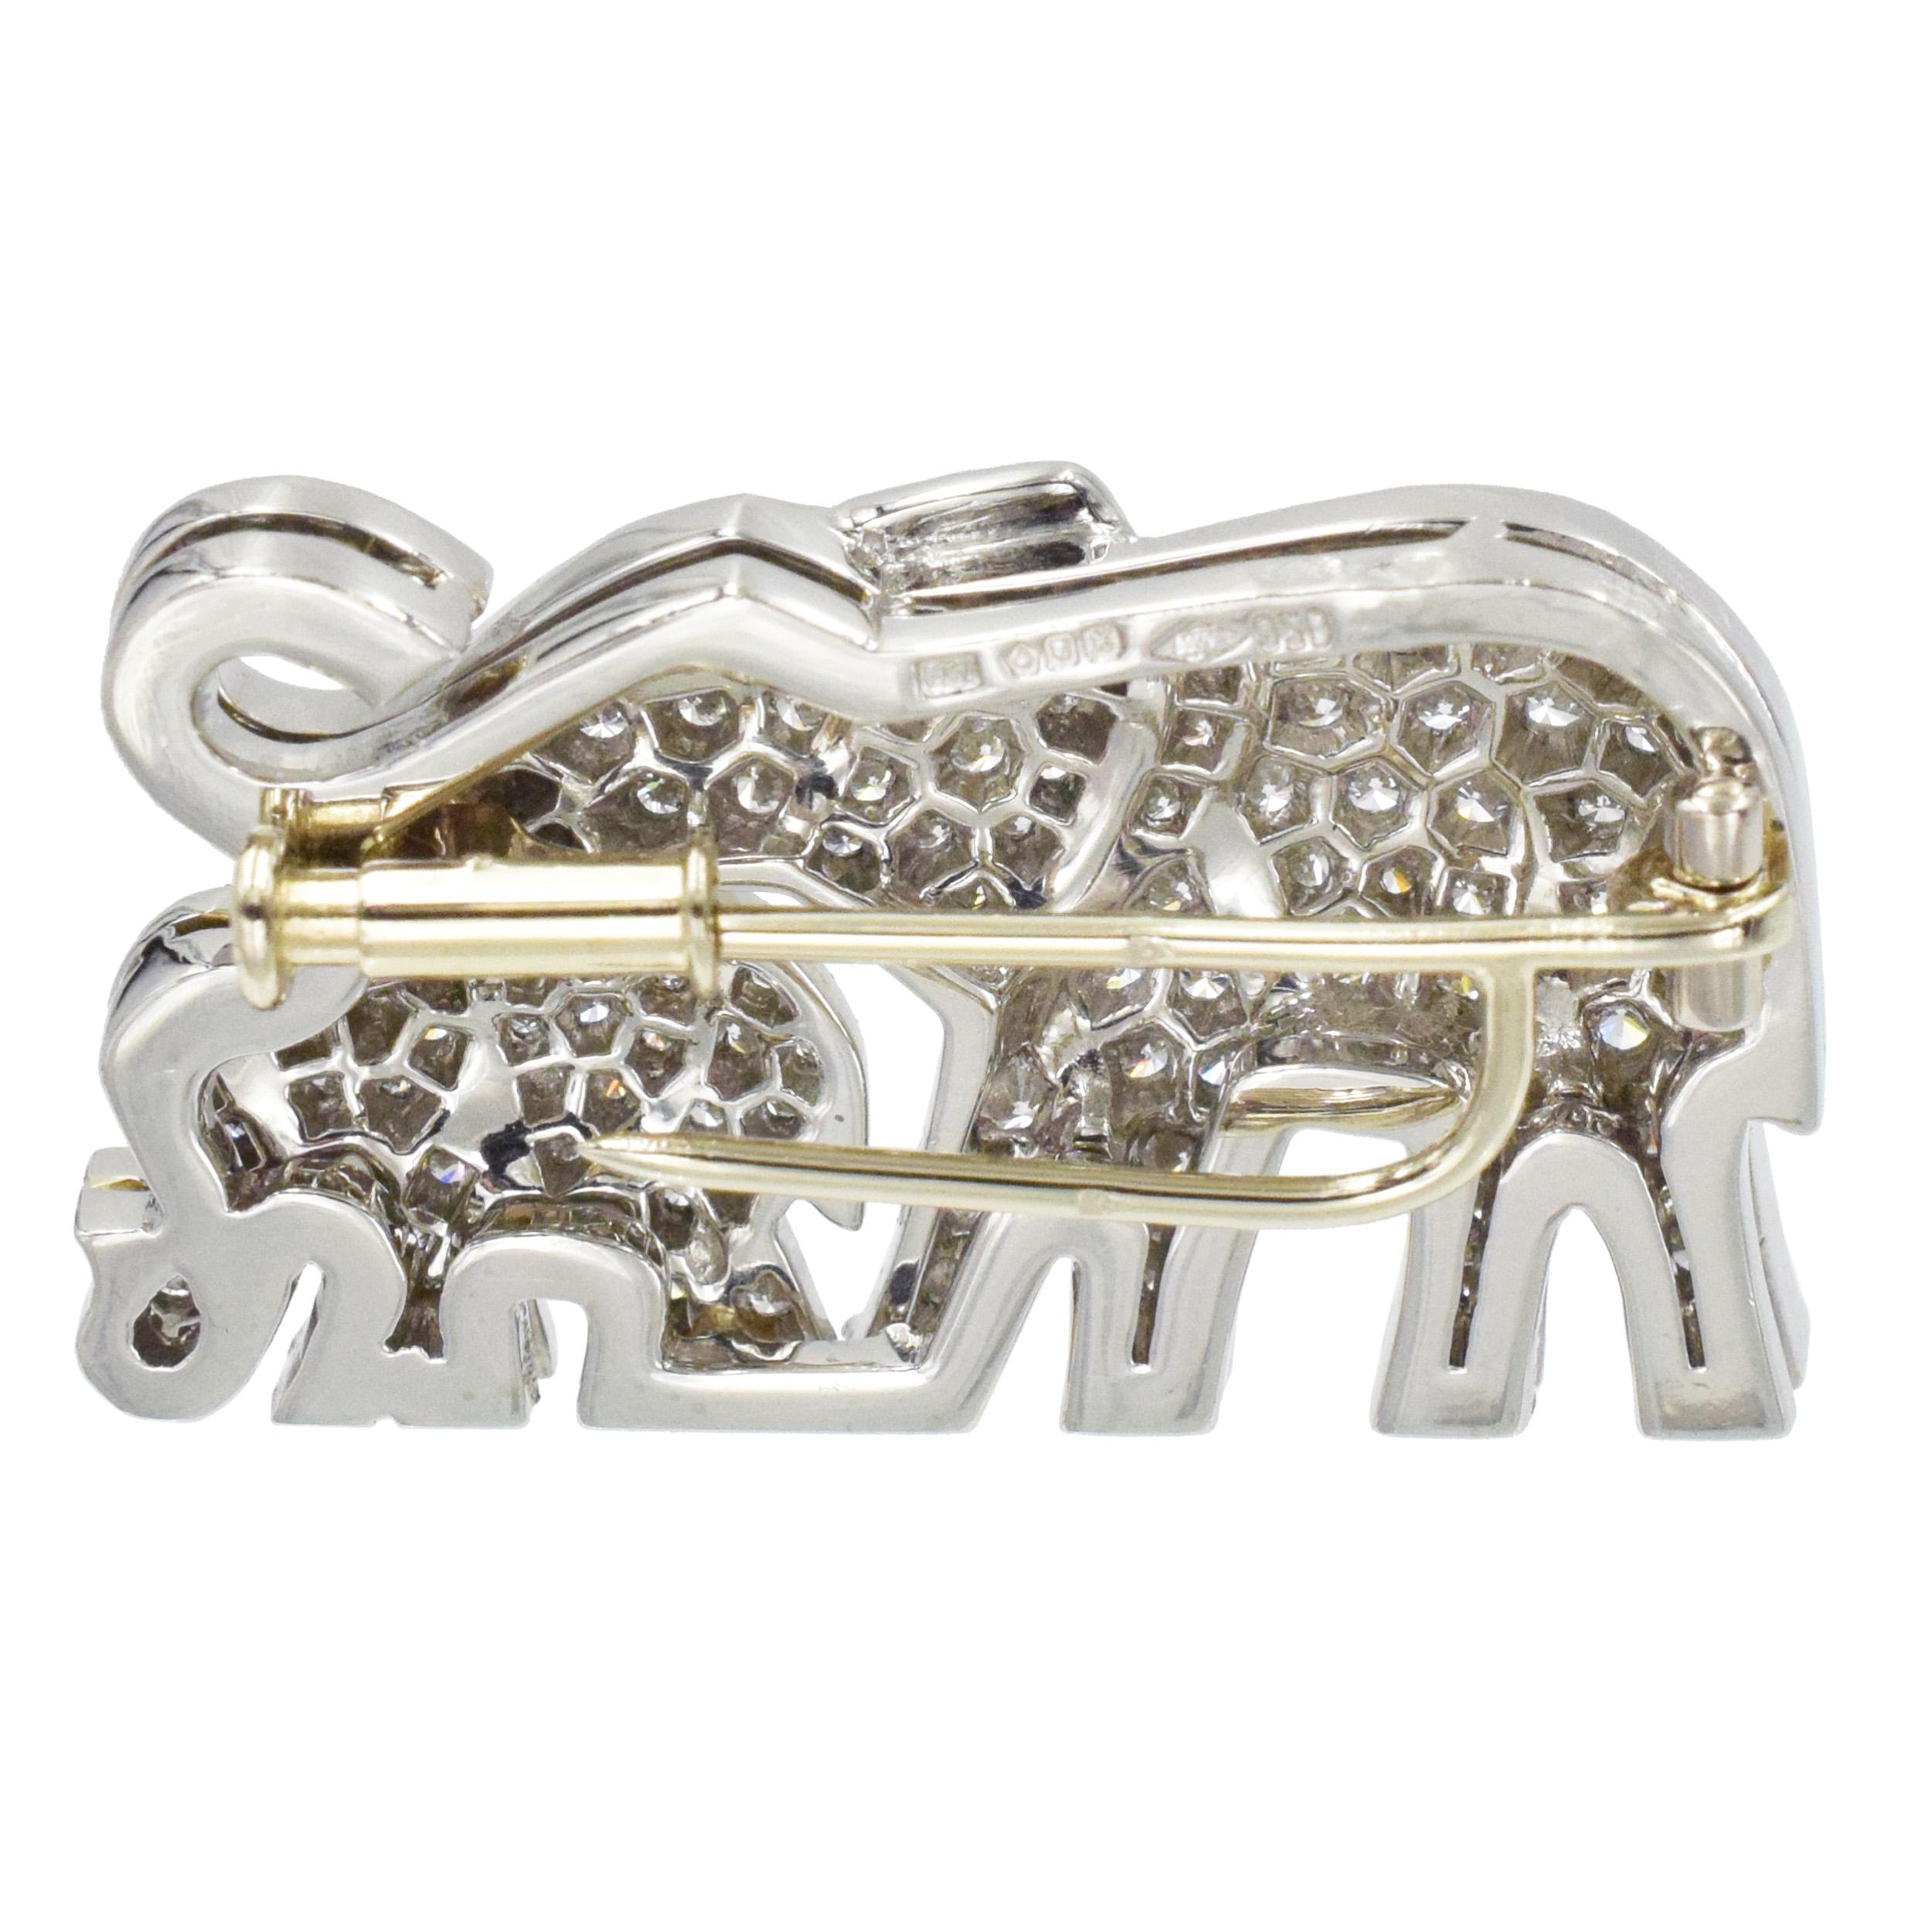 Round Cut Cartier Diamond and Emerald Elephant Brooch and Earrings Set In Platinum.